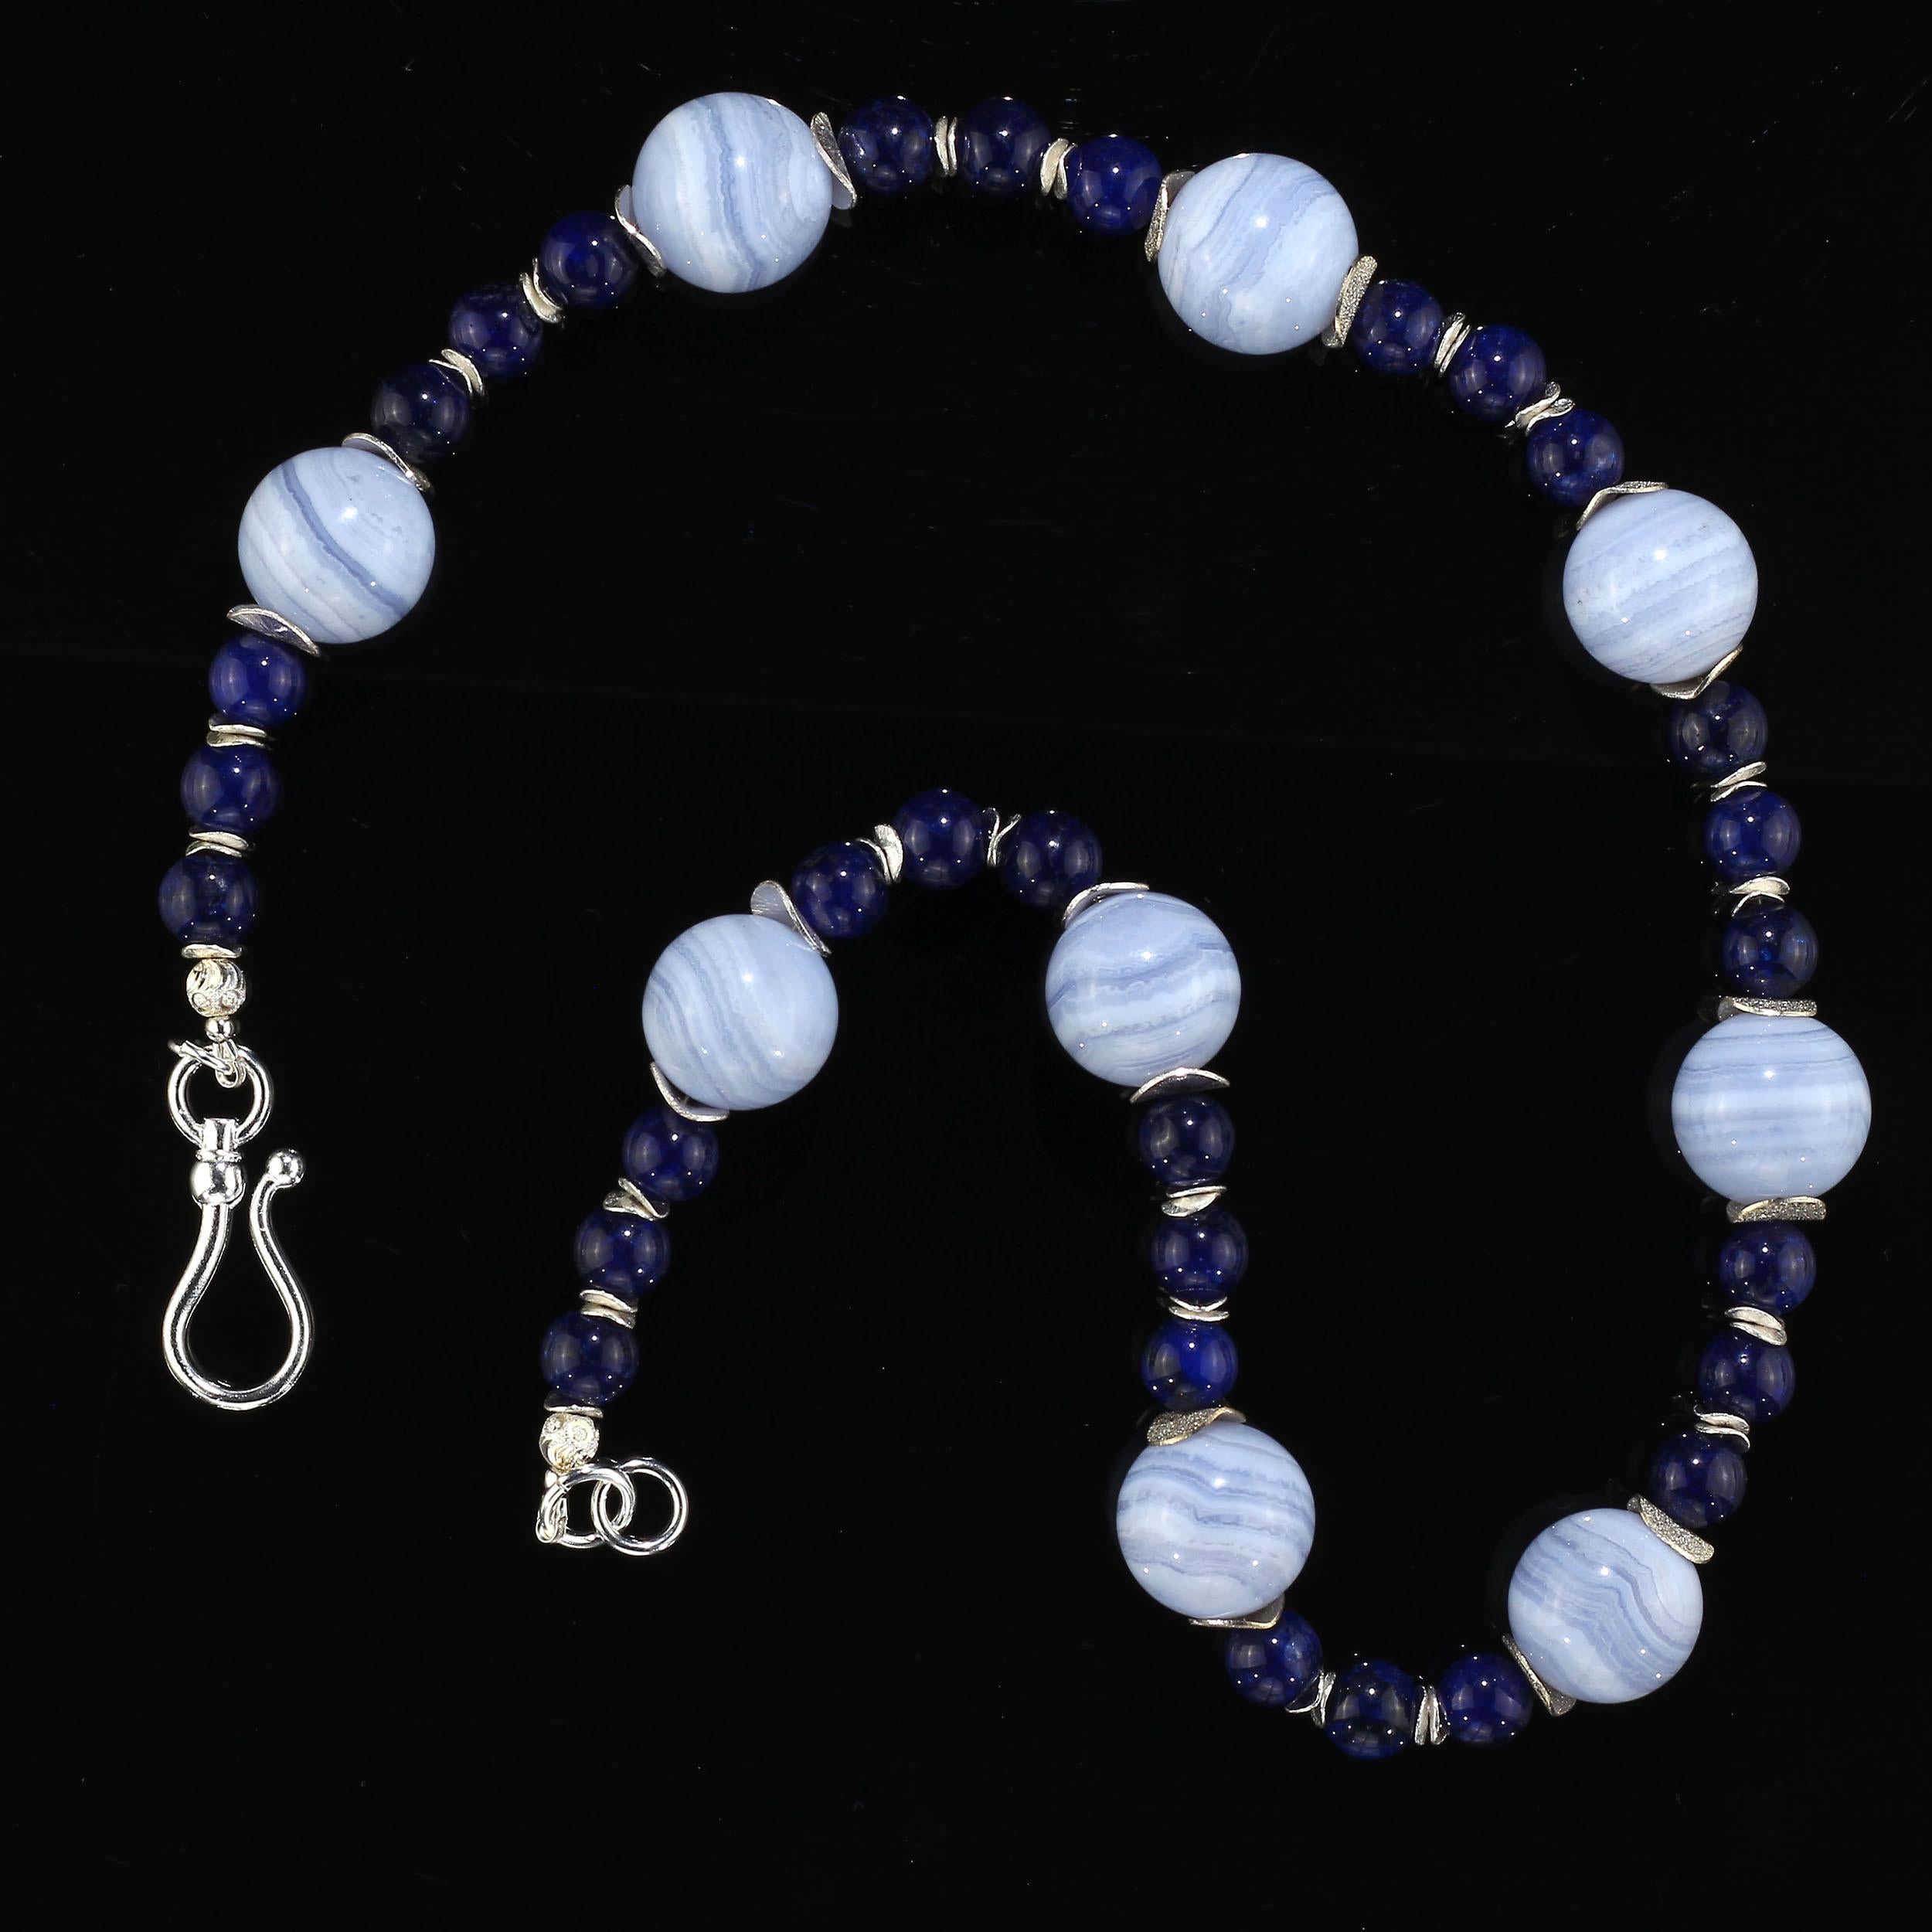 Women's or Men's Gemjunky Hot Topic Necklace of Blue Lace Agate and Blue Agate